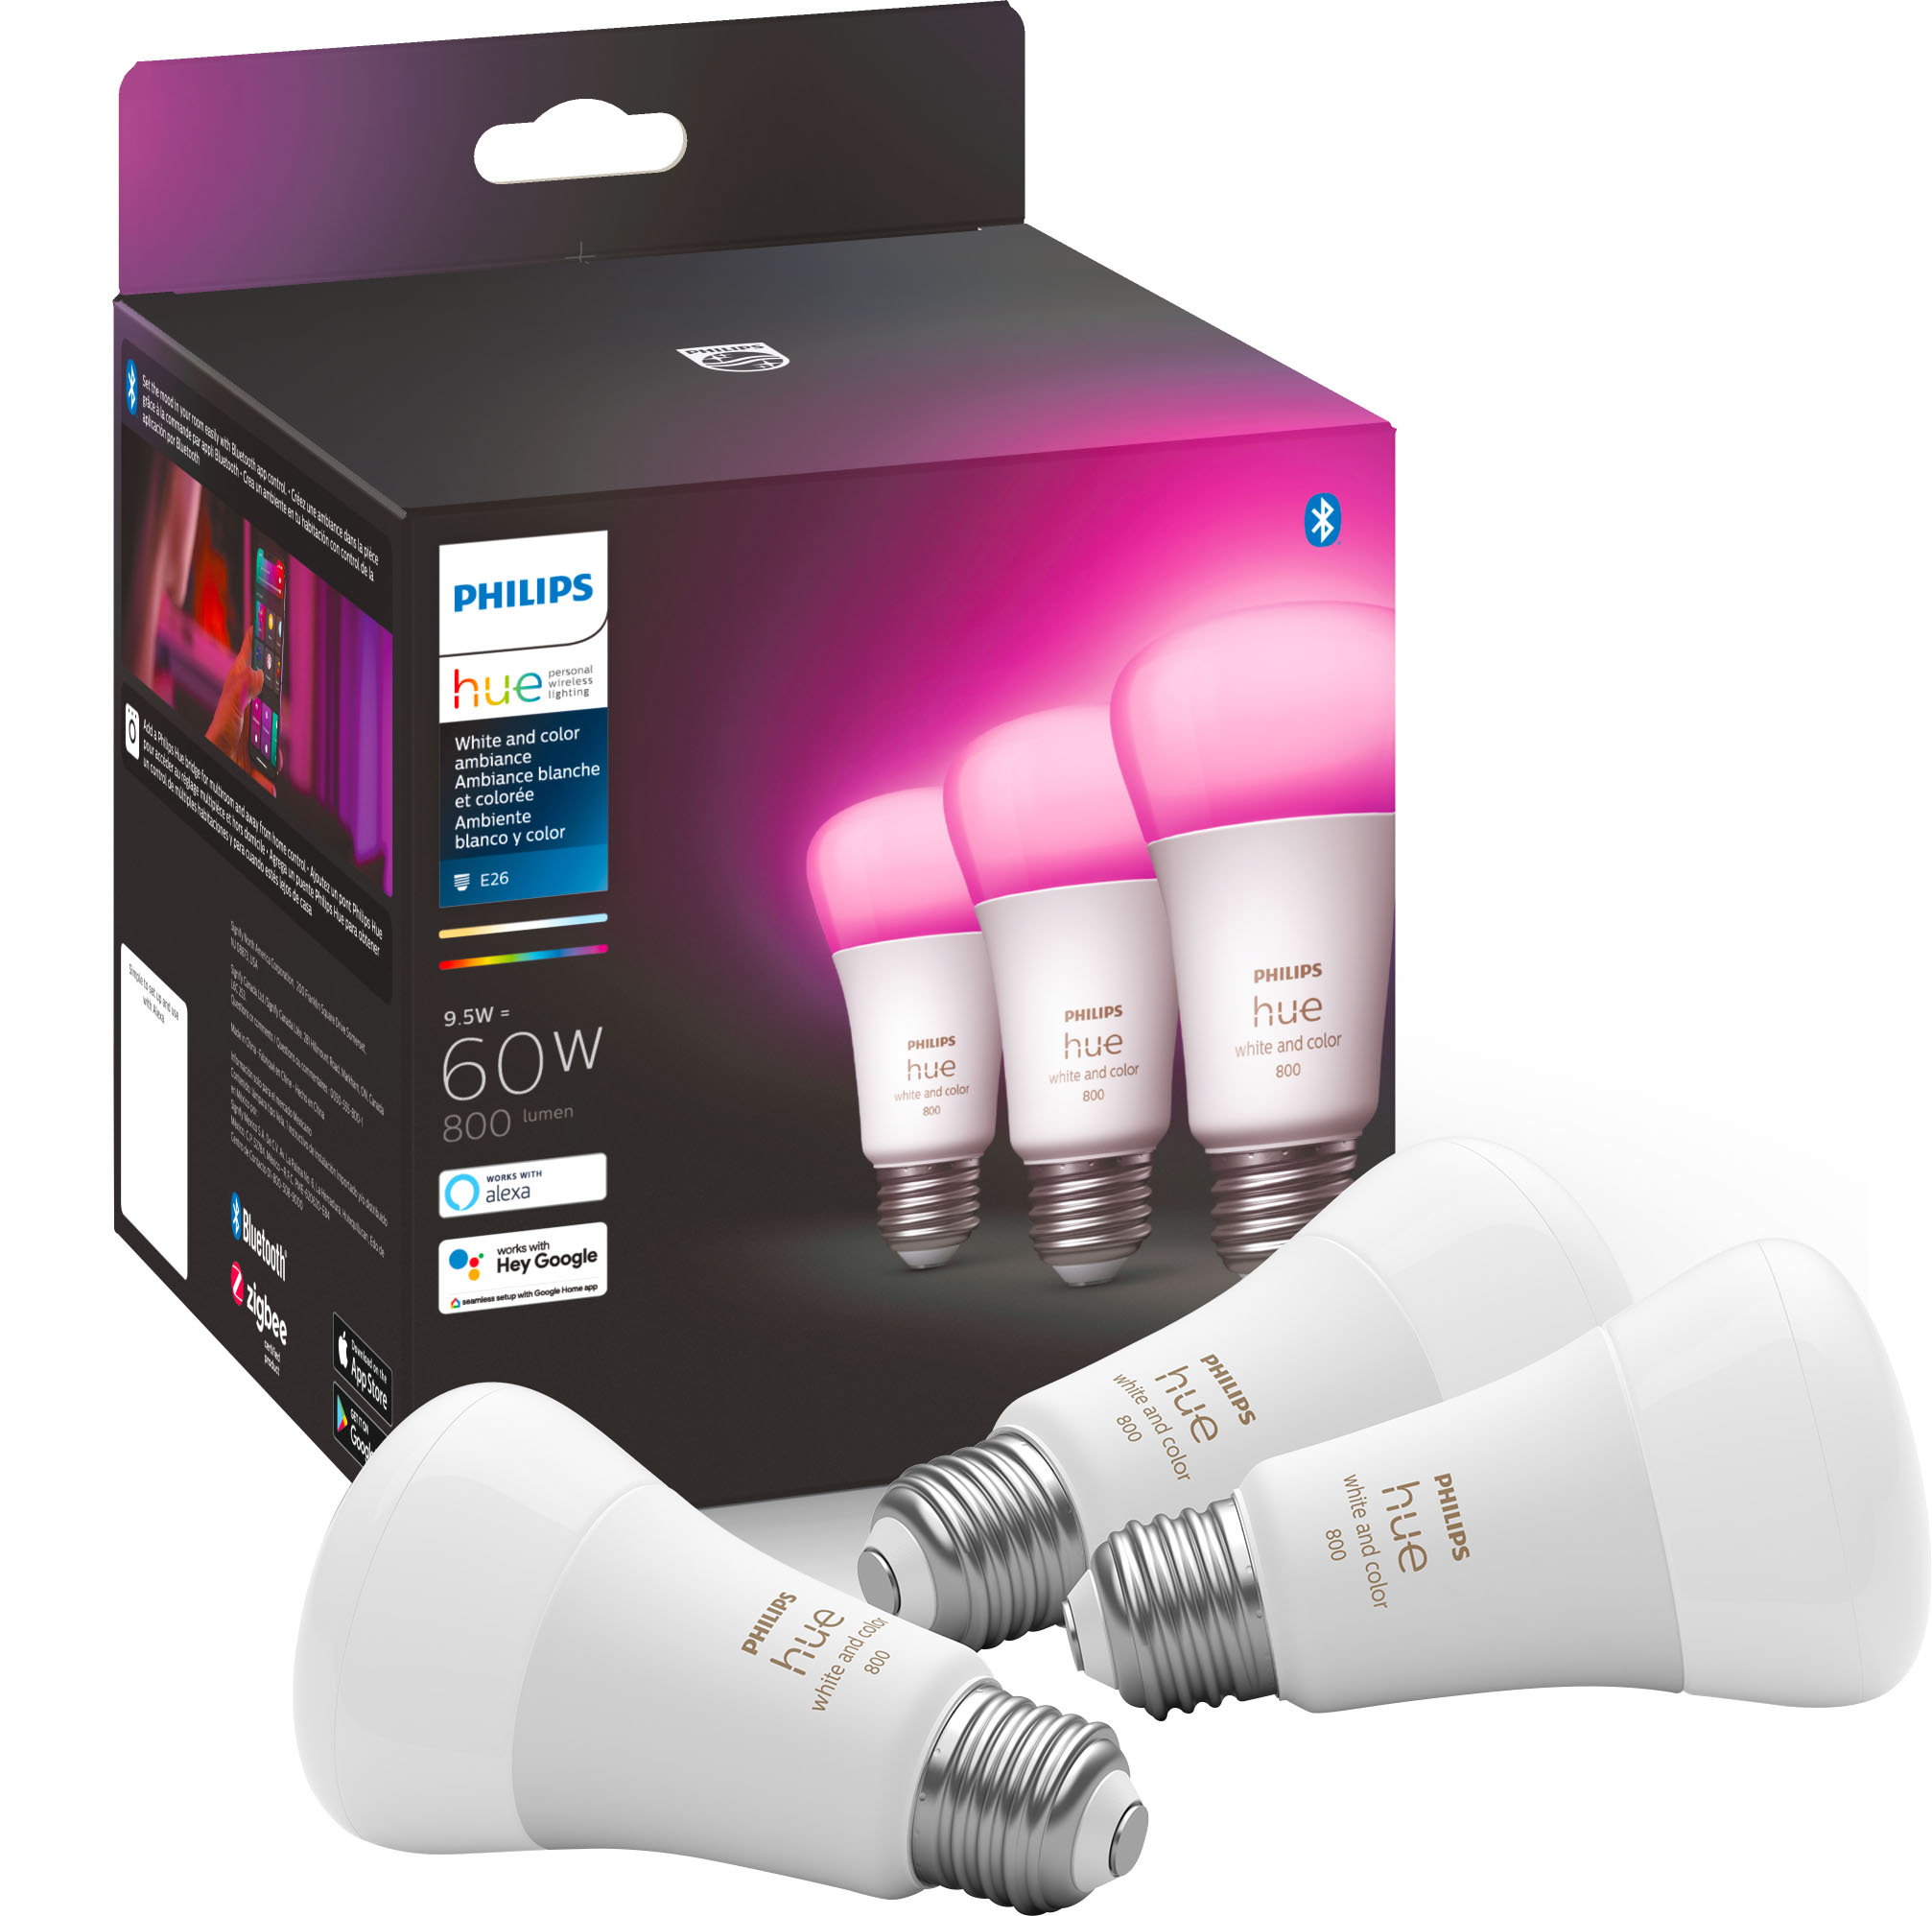 Philips A19 60W LED Smart Bulbs (3-Pack) White and Color Ambiance 562785 - Best Buy